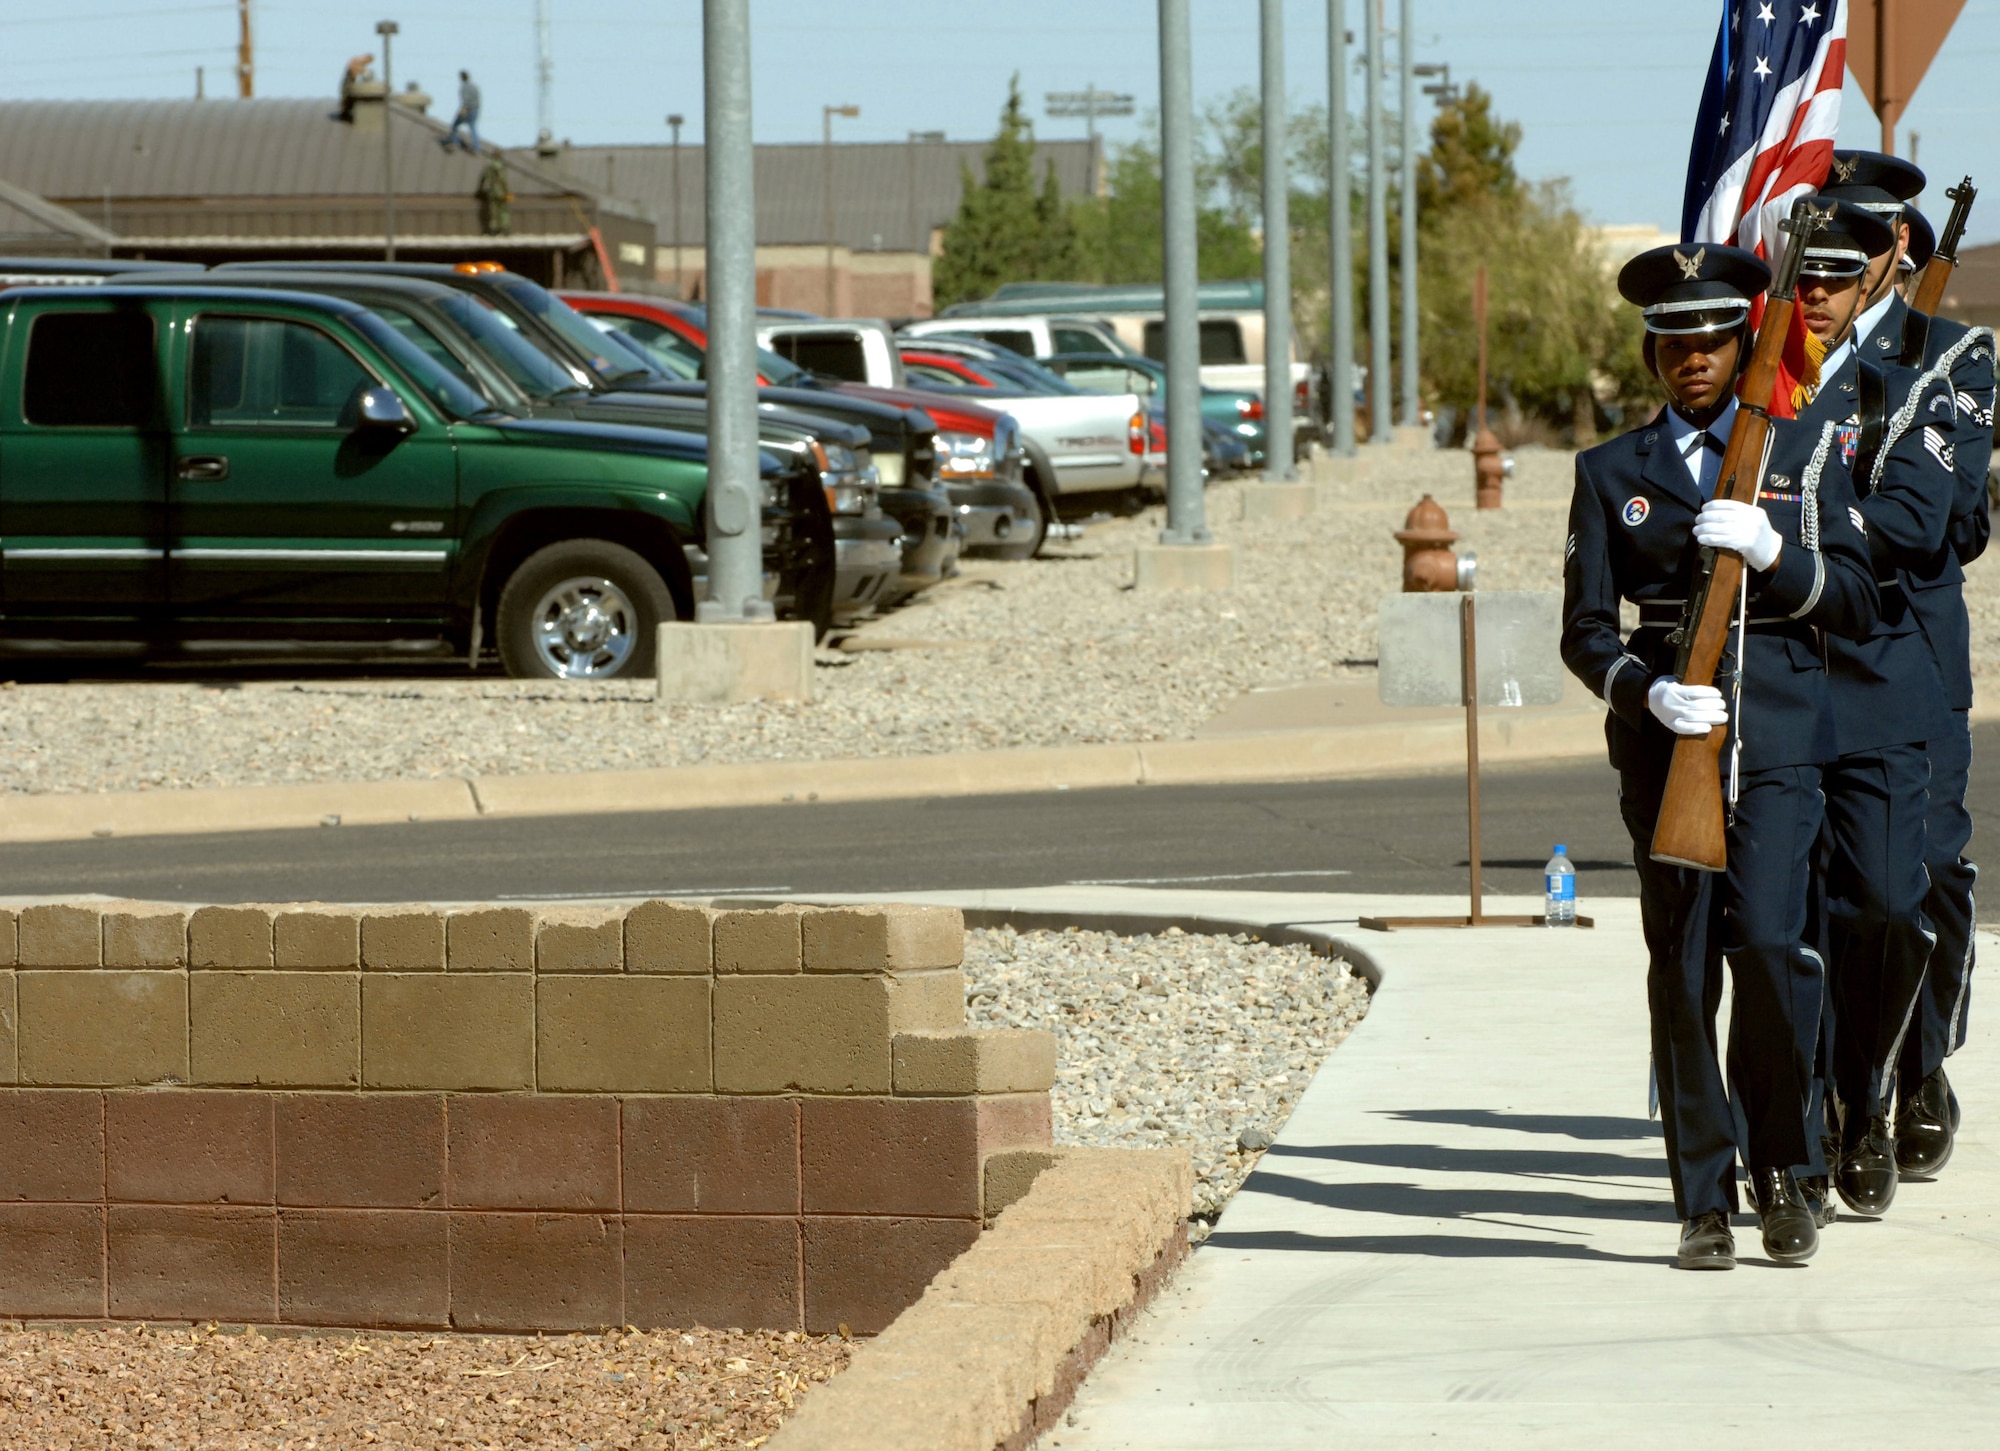 Senior Airman LaToya Smitherman leads Holloman Air Force Base, Steel Talons, Honor Guard detail members out of the ceremony during Sunset Stealth F-117A Retirement Ceremony Apr 21, Holloman Air Force Base, N.M.
(U.S. Air Force photo/ Senior Airman Anthony Nelson Jr)
